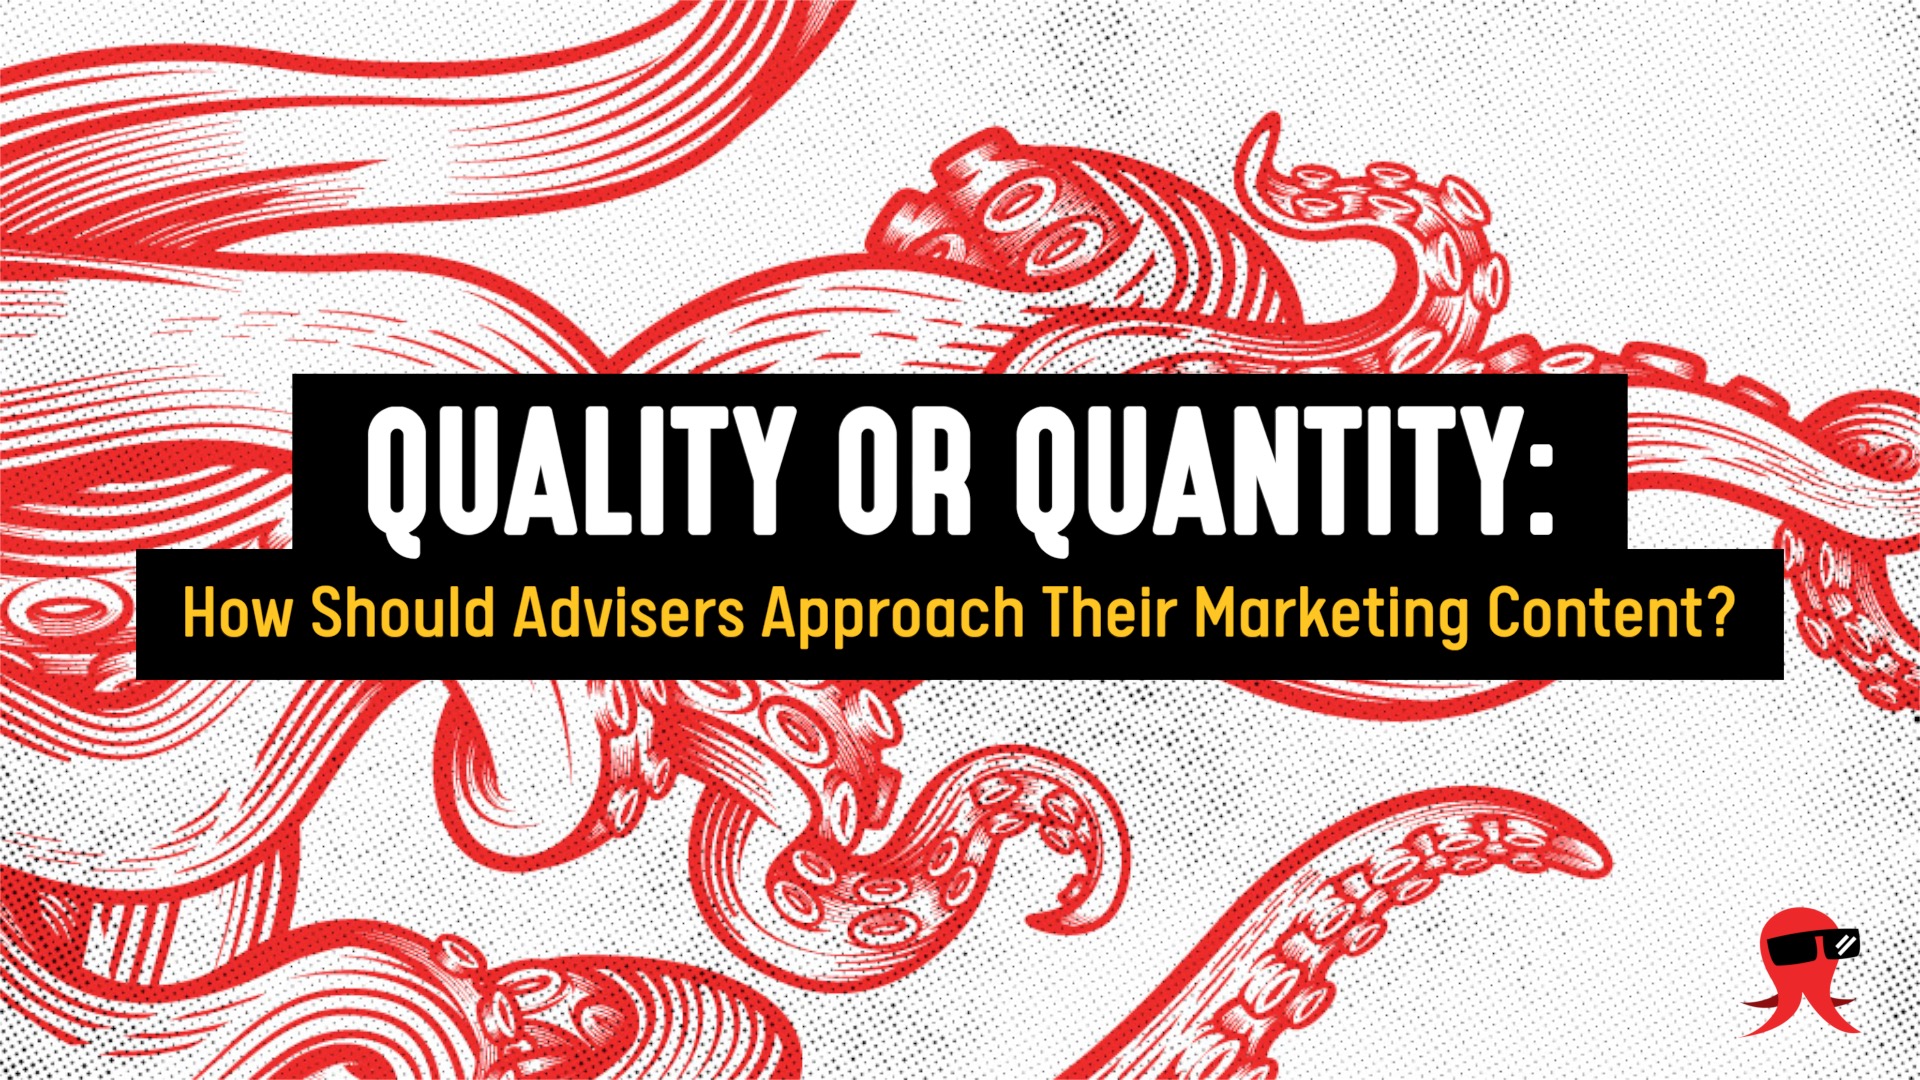 Quality or Quantity: How Should Advisers Approach Their Marketing Content?